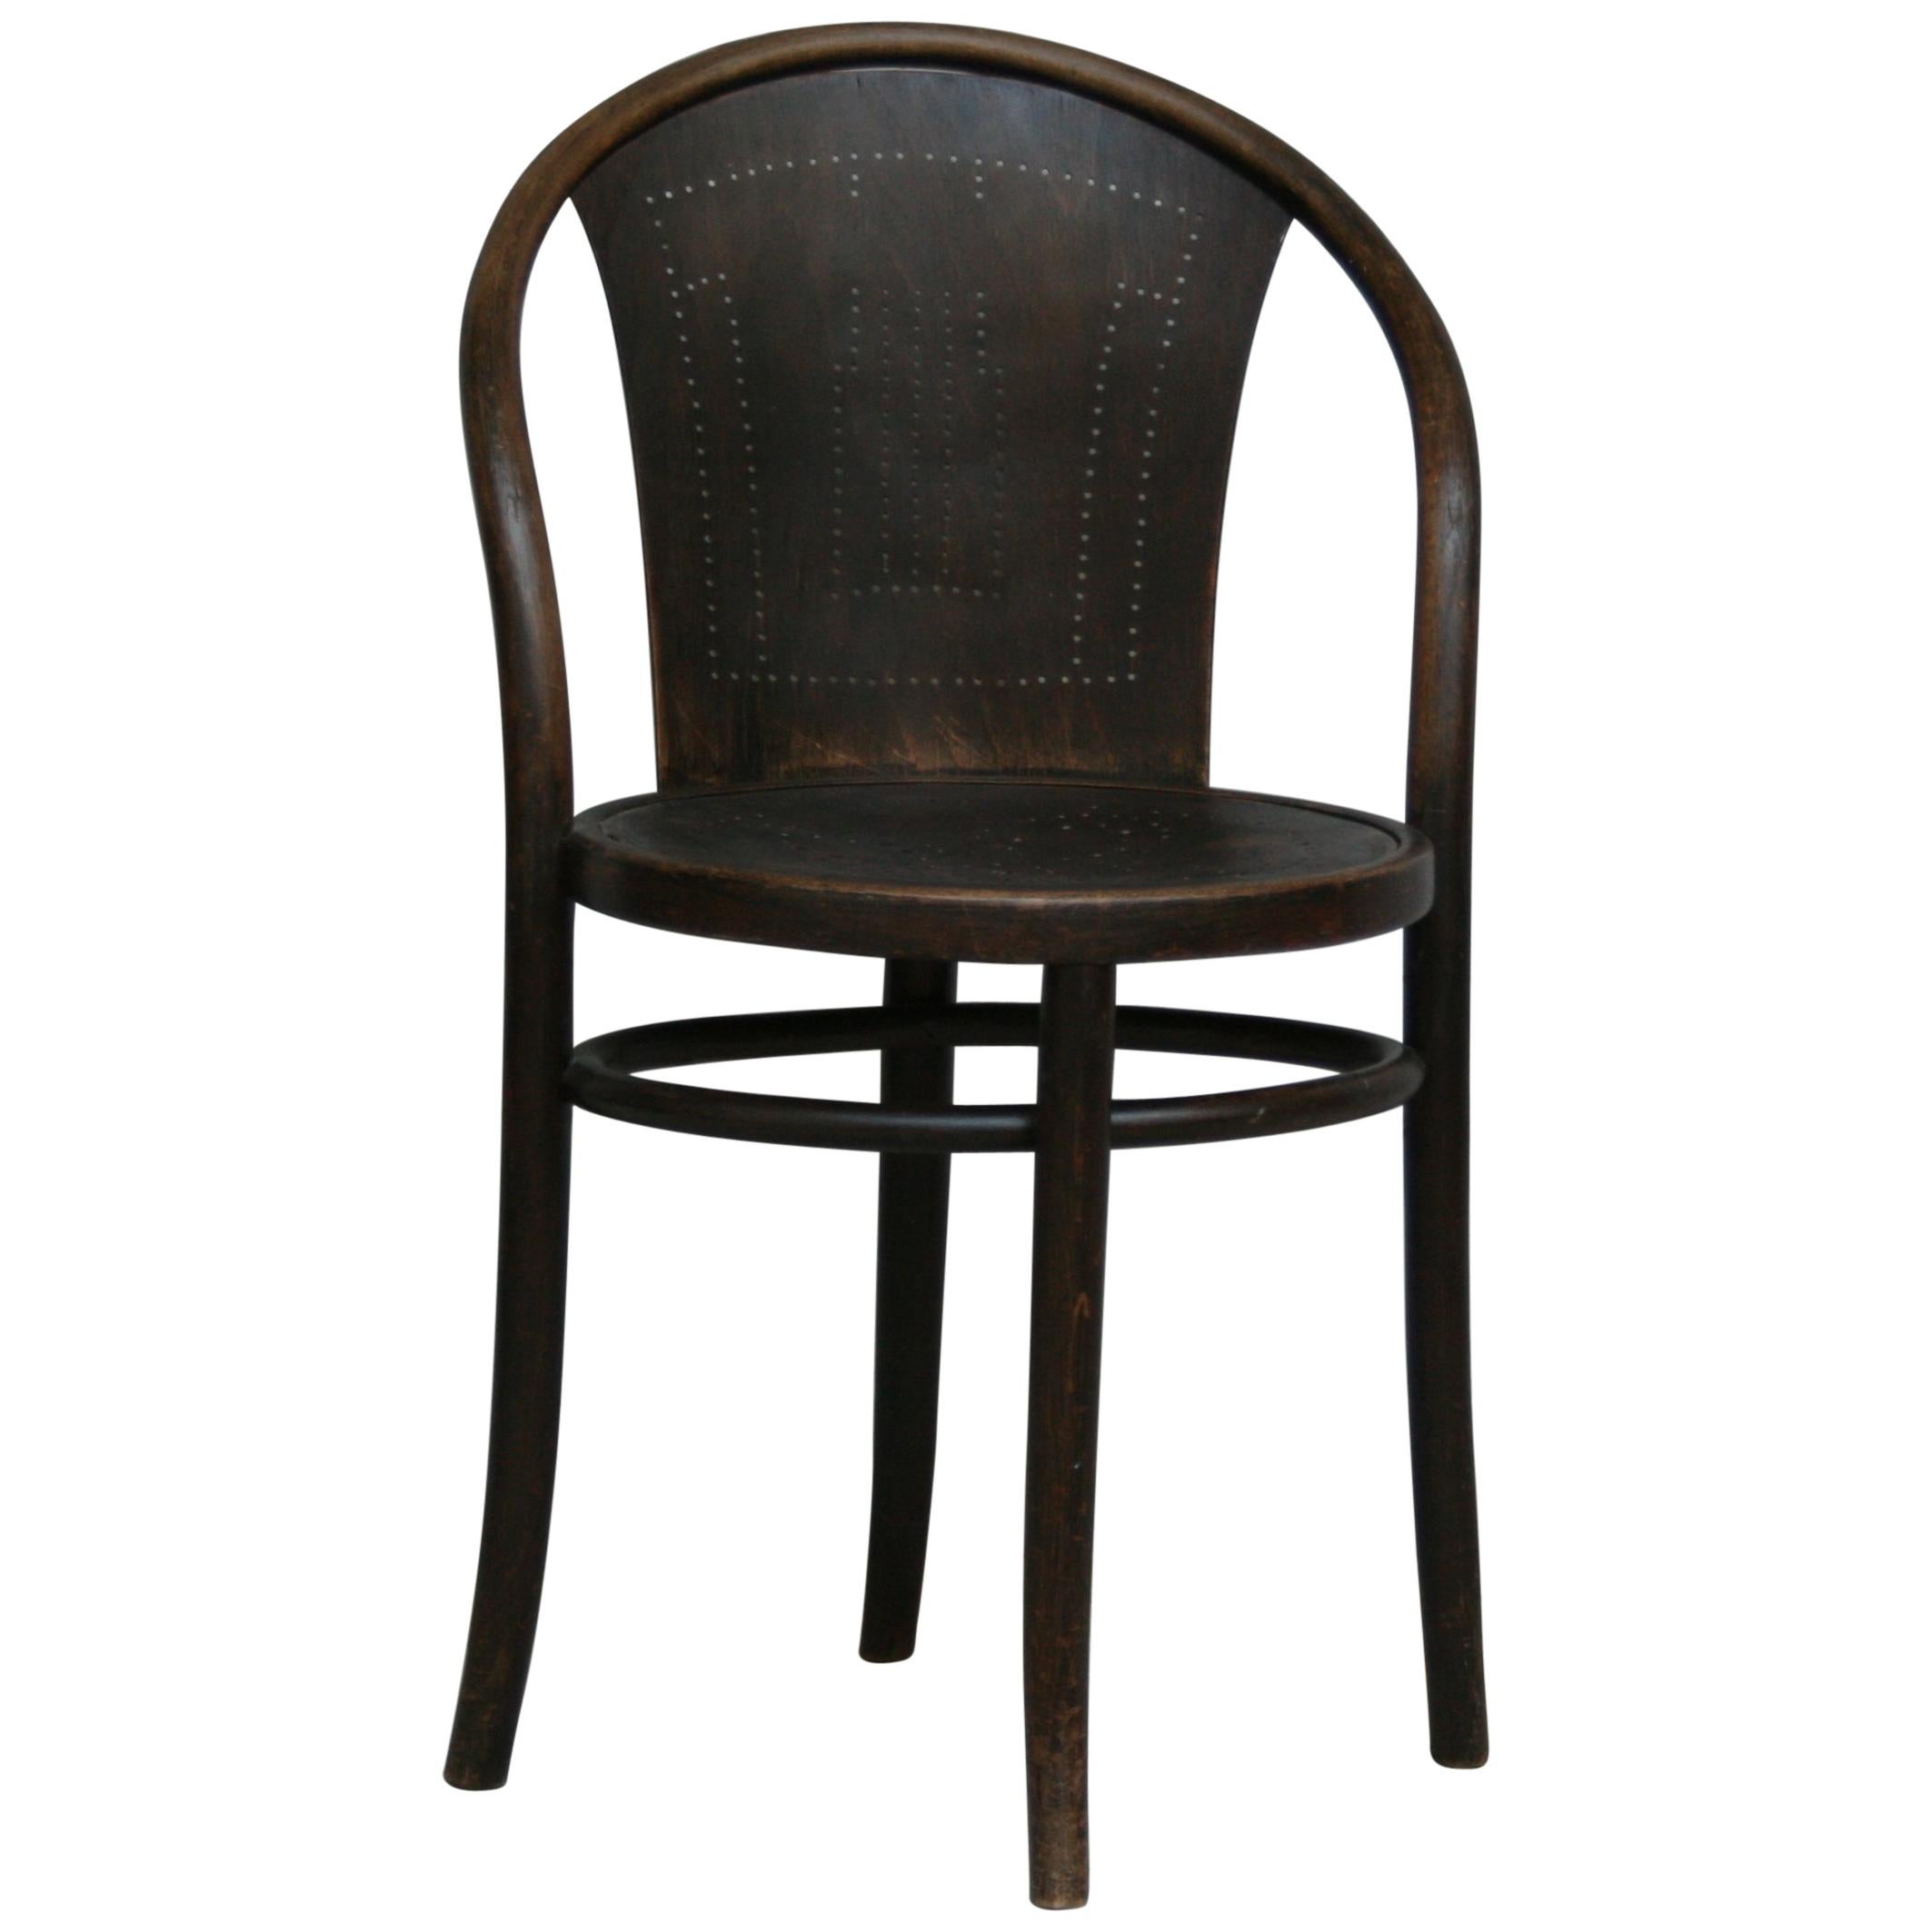 Thonet Chair Model 47, by Michael Thonet for Thonet, circa 1911 For Sale